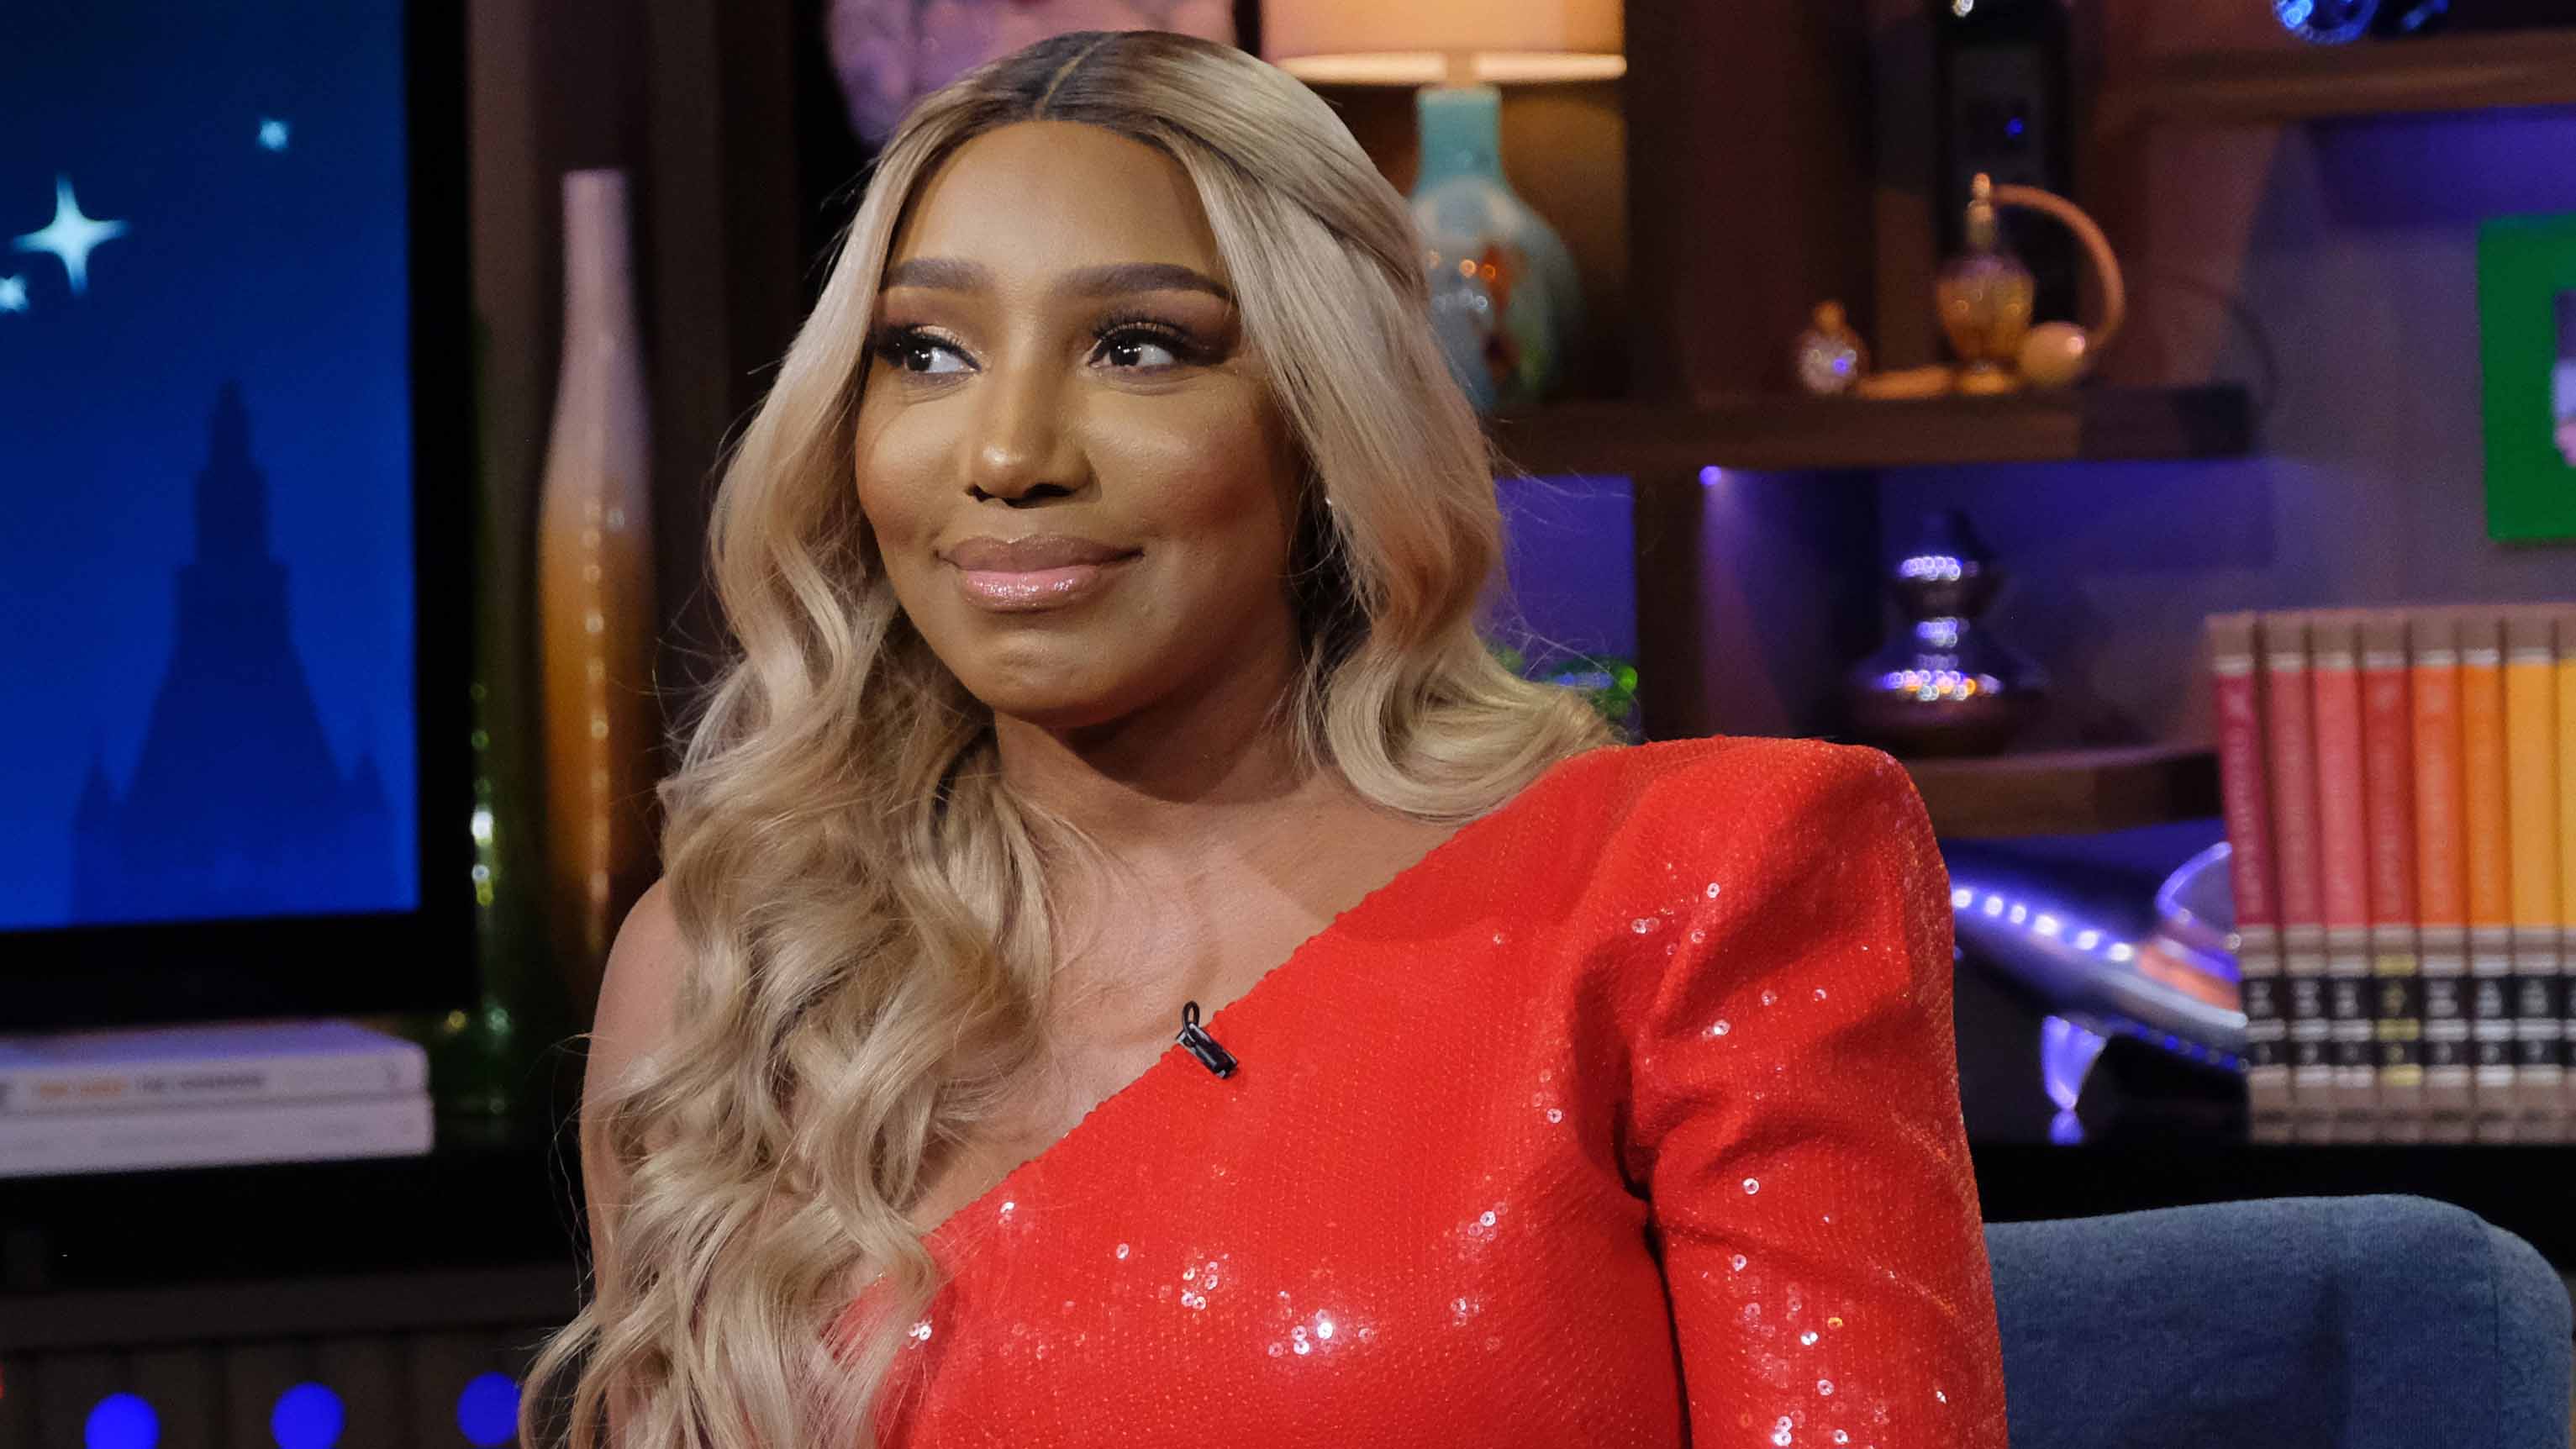 Real Housewives of Atlanta Season 13 Trailer Tackles Black Lives Matter and Bachelorette Parties Entertainment Tonight